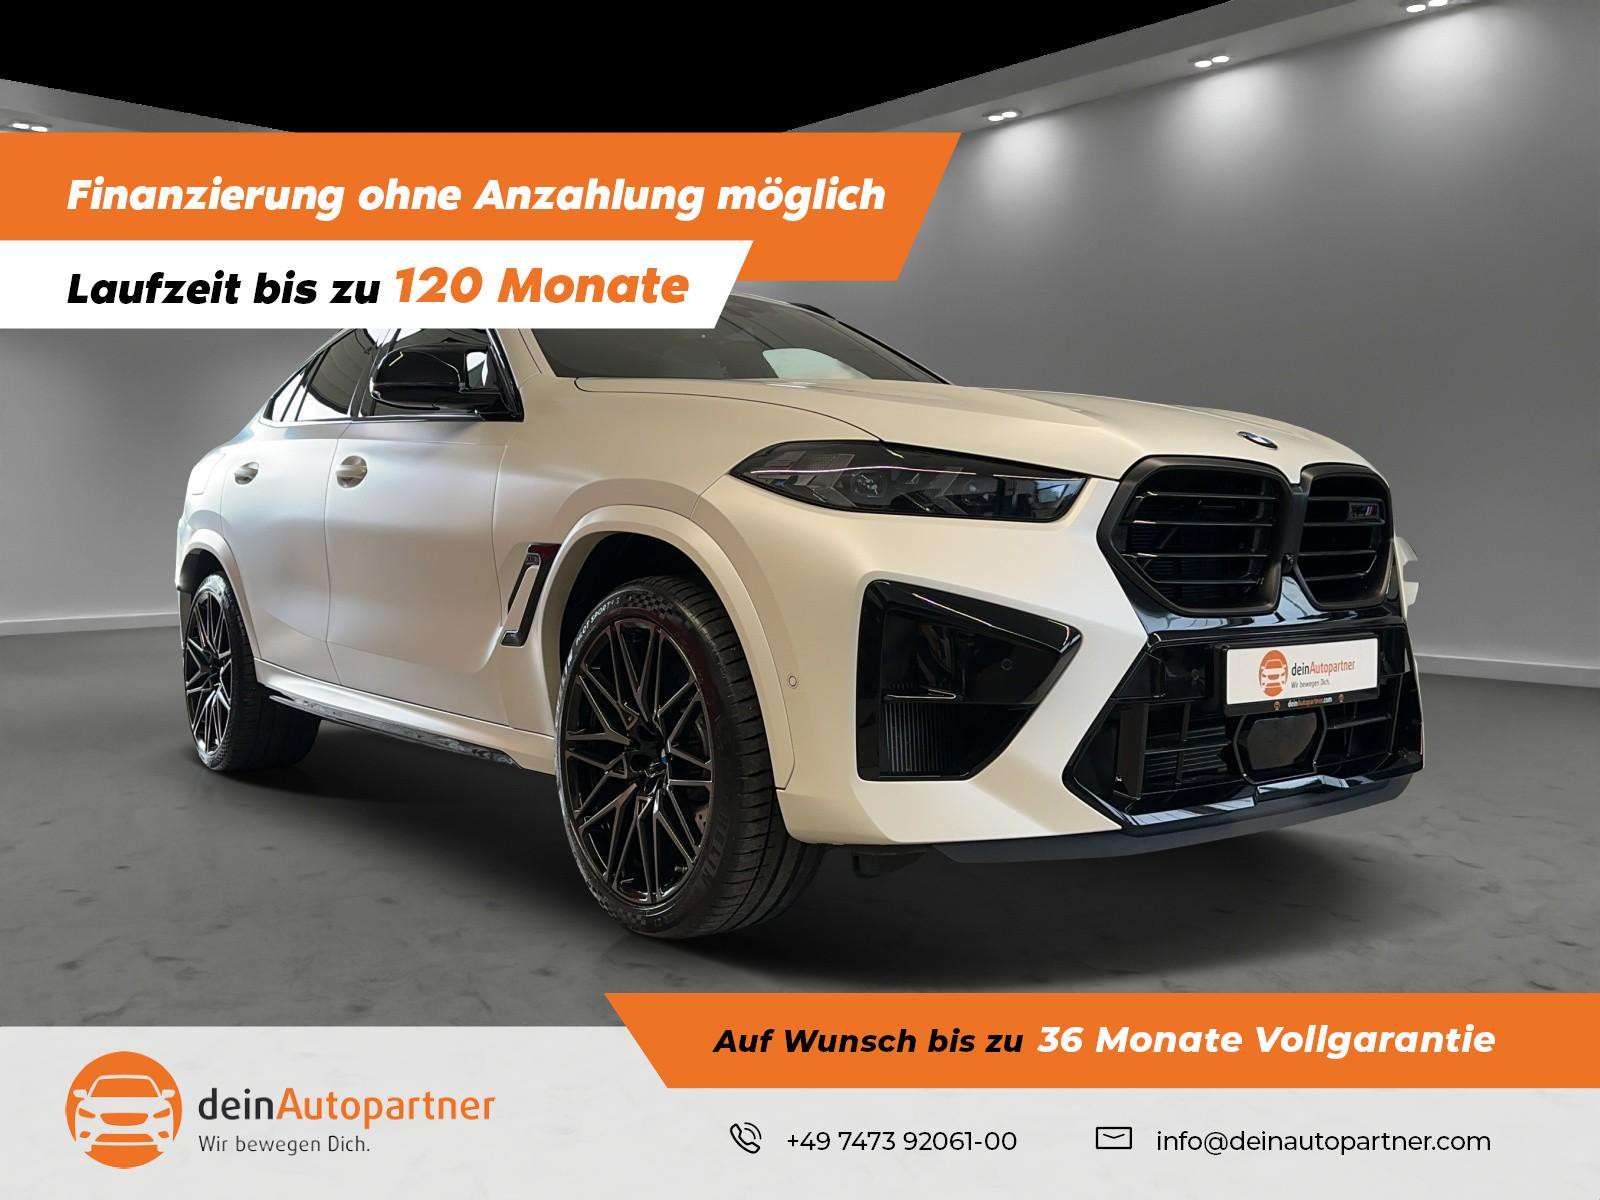 BMW X6 M Off-Road/Pick-up in White used in Mössingen for € 143,900.-